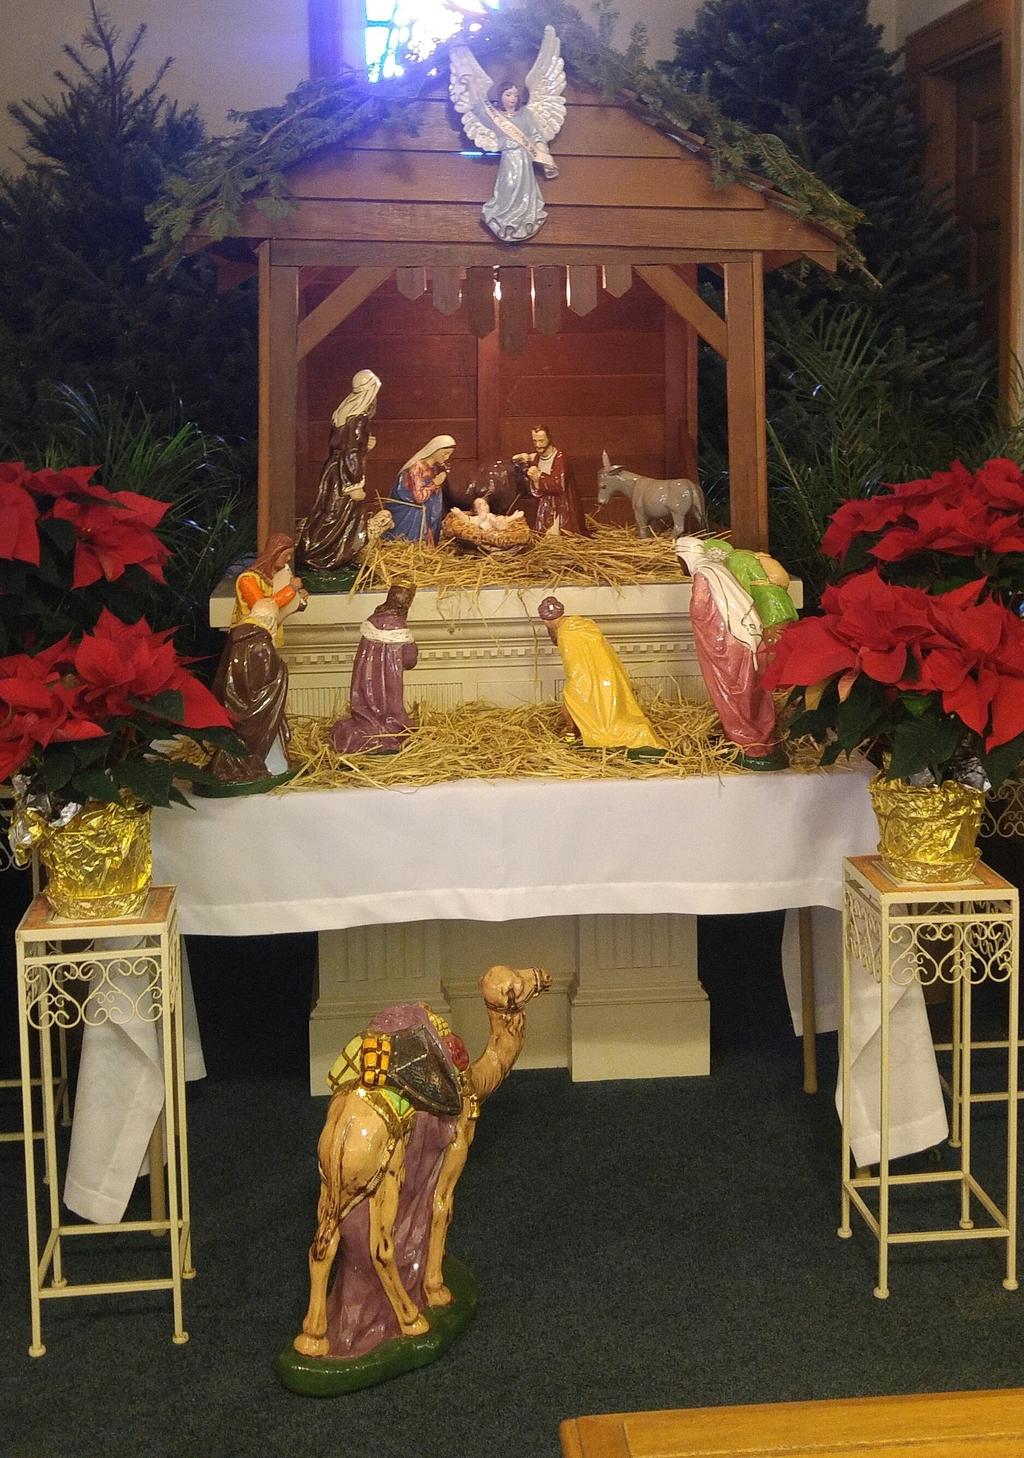 St. Francis of Assisi Parish 530 Gardners Neck Road Swansea, Massachusetts 02777 Feast of the Epiphany They were overjoyed at seeing the star, and on entering the house they saw the child with Mary